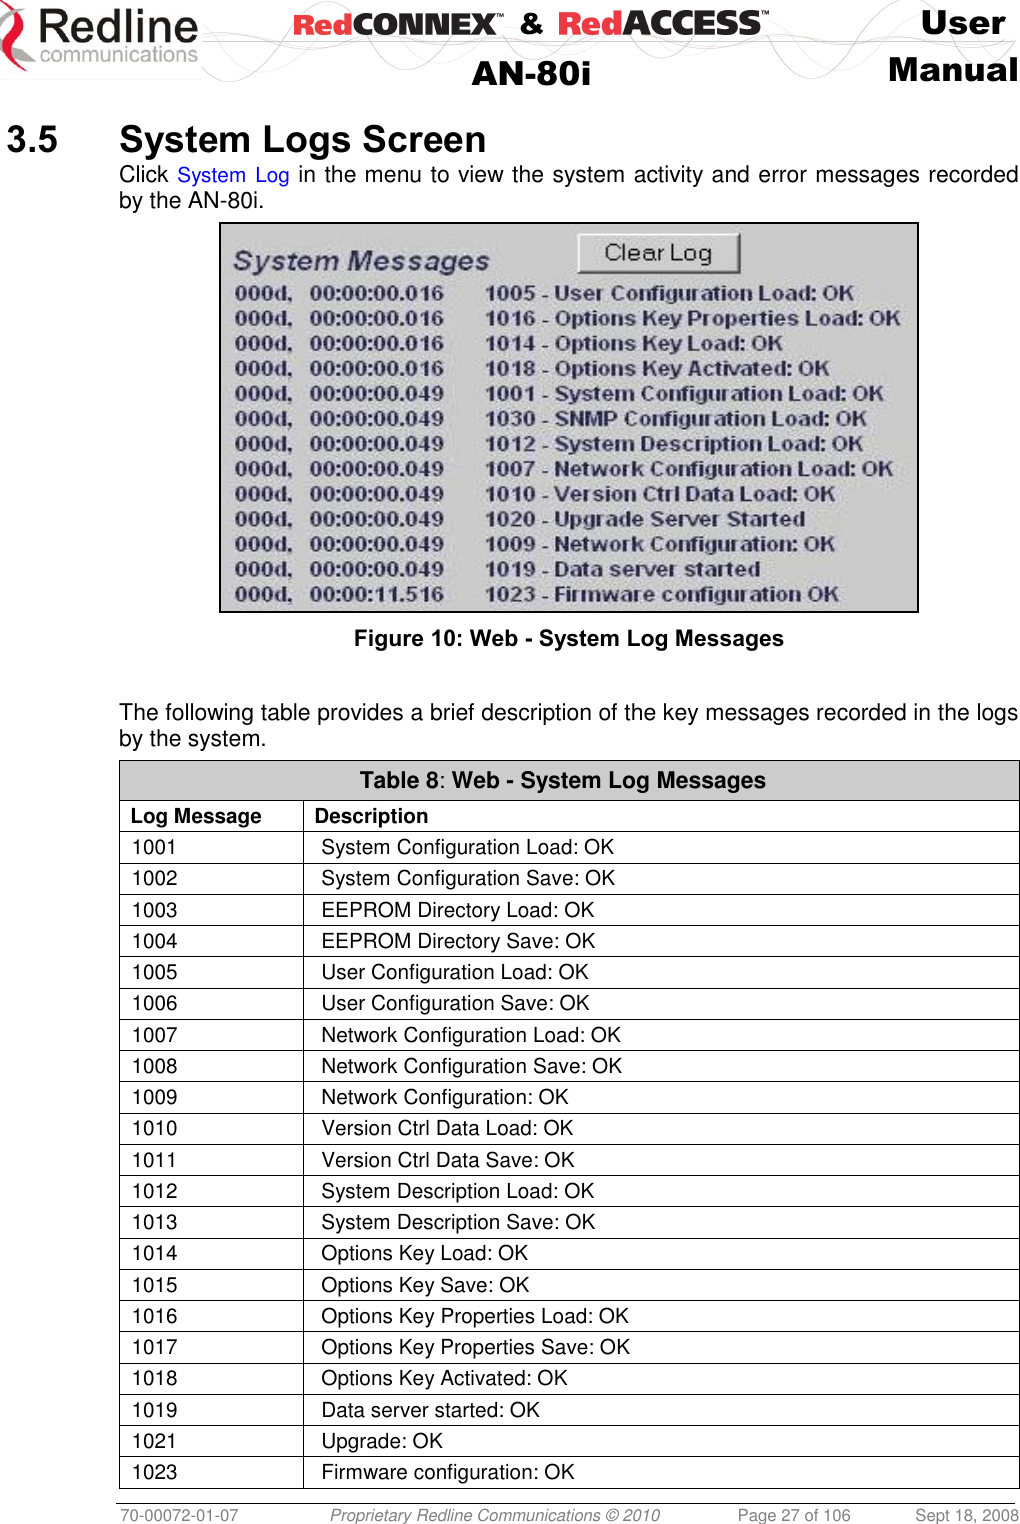    &amp;  User  AN-80i Manual  70-00072-01-07 Proprietary Redline Communications © 2010  Page 27 of 106  Sept 18, 2008  3.5 System Logs Screen Click System Log in the menu to view the system activity and error messages recorded by the AN-80i.  Figure 10: Web - System Log Messages  The following table provides a brief description of the key messages recorded in the logs by the system. Table 8: Web - System Log Messages Log Message Description 1001   System Configuration Load: OK 1002   System Configuration Save: OK 1003   EEPROM Directory Load: OK 1004   EEPROM Directory Save: OK 1005   User Configuration Load: OK 1006   User Configuration Save: OK 1007   Network Configuration Load: OK 1008   Network Configuration Save: OK 1009   Network Configuration: OK 1010   Version Ctrl Data Load: OK 1011   Version Ctrl Data Save: OK 1012   System Description Load: OK 1013   System Description Save: OK 1014   Options Key Load: OK 1015   Options Key Save: OK 1016   Options Key Properties Load: OK 1017   Options Key Properties Save: OK 1018   Options Key Activated: OK 1019   Data server started: OK 1021   Upgrade: OK 1023   Firmware configuration: OK 